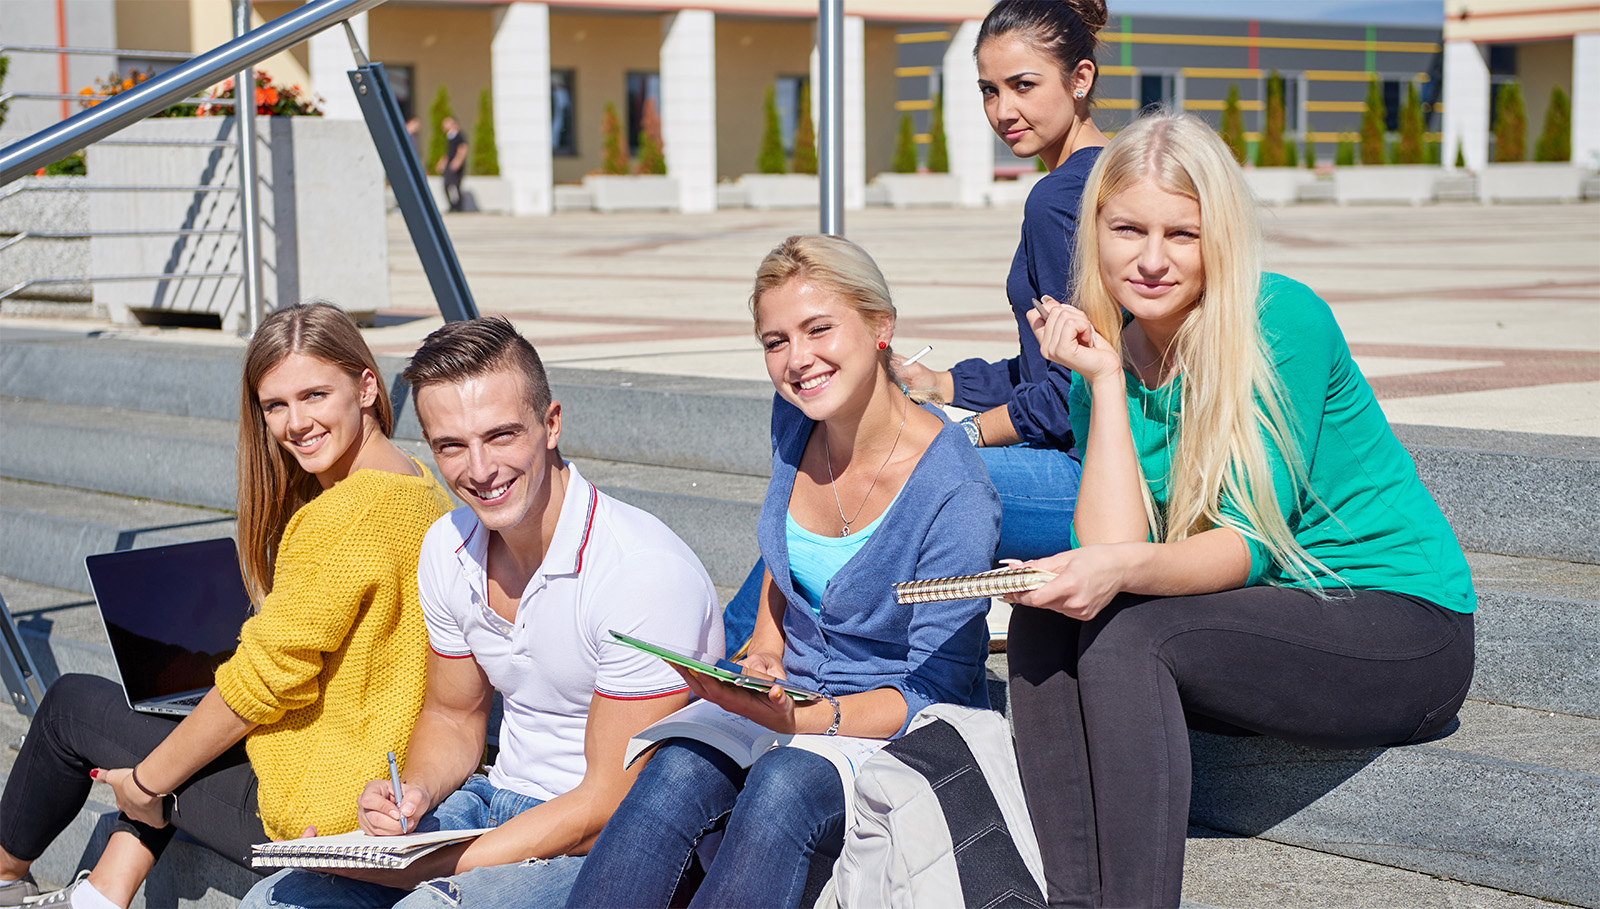 Group of high schools students studying, sitting on outside steps